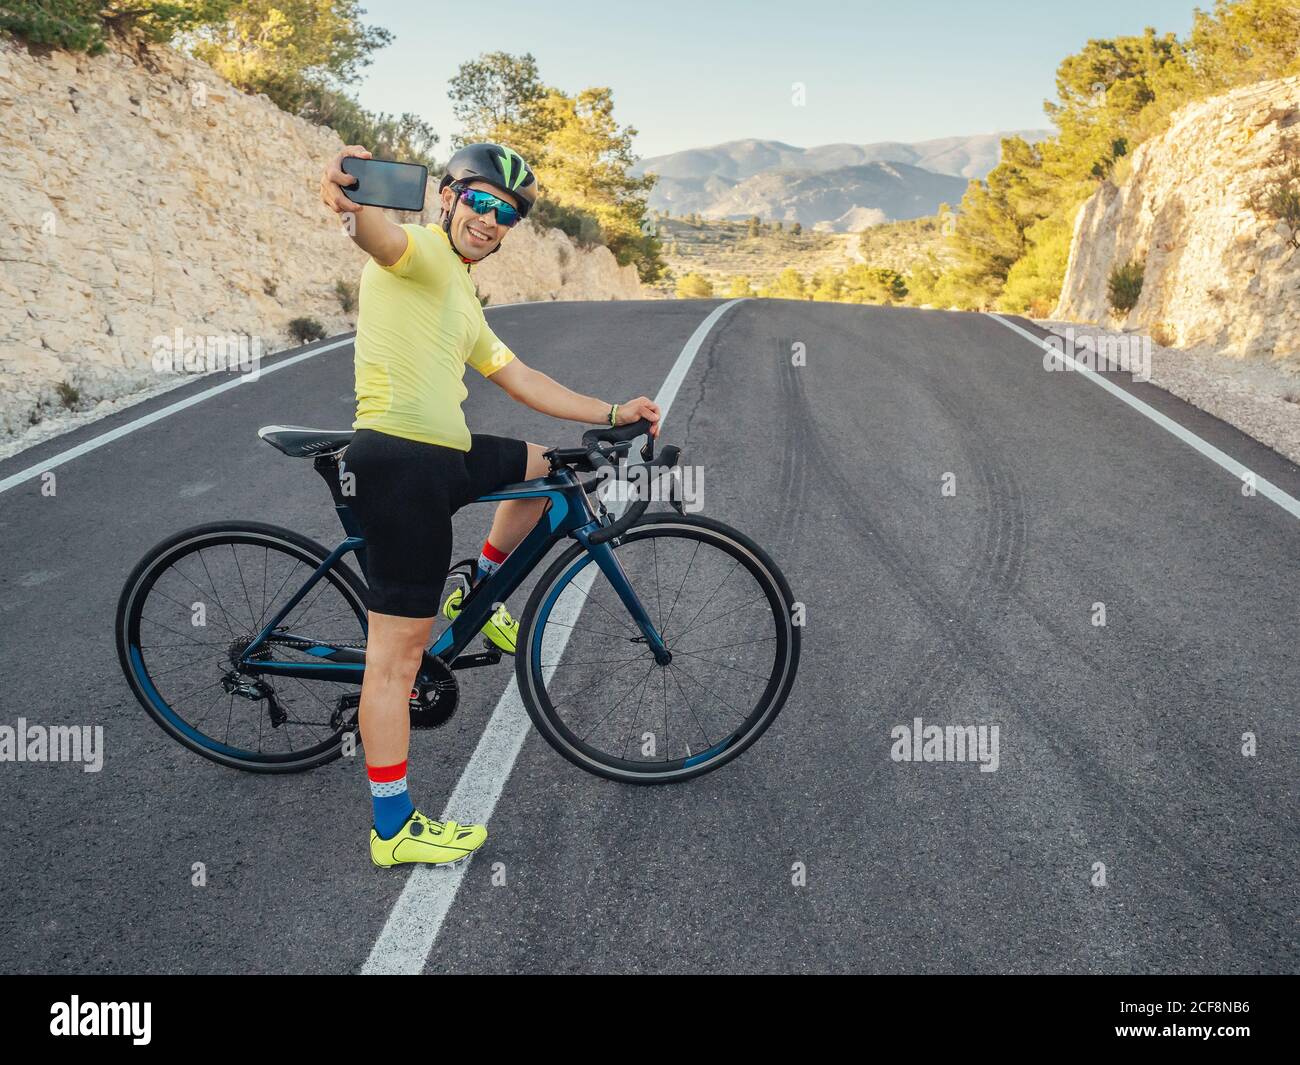 healthy man resting and taking selfie with smartphone while riding a bicycle on a mountain road in a sunny day Stock Photo